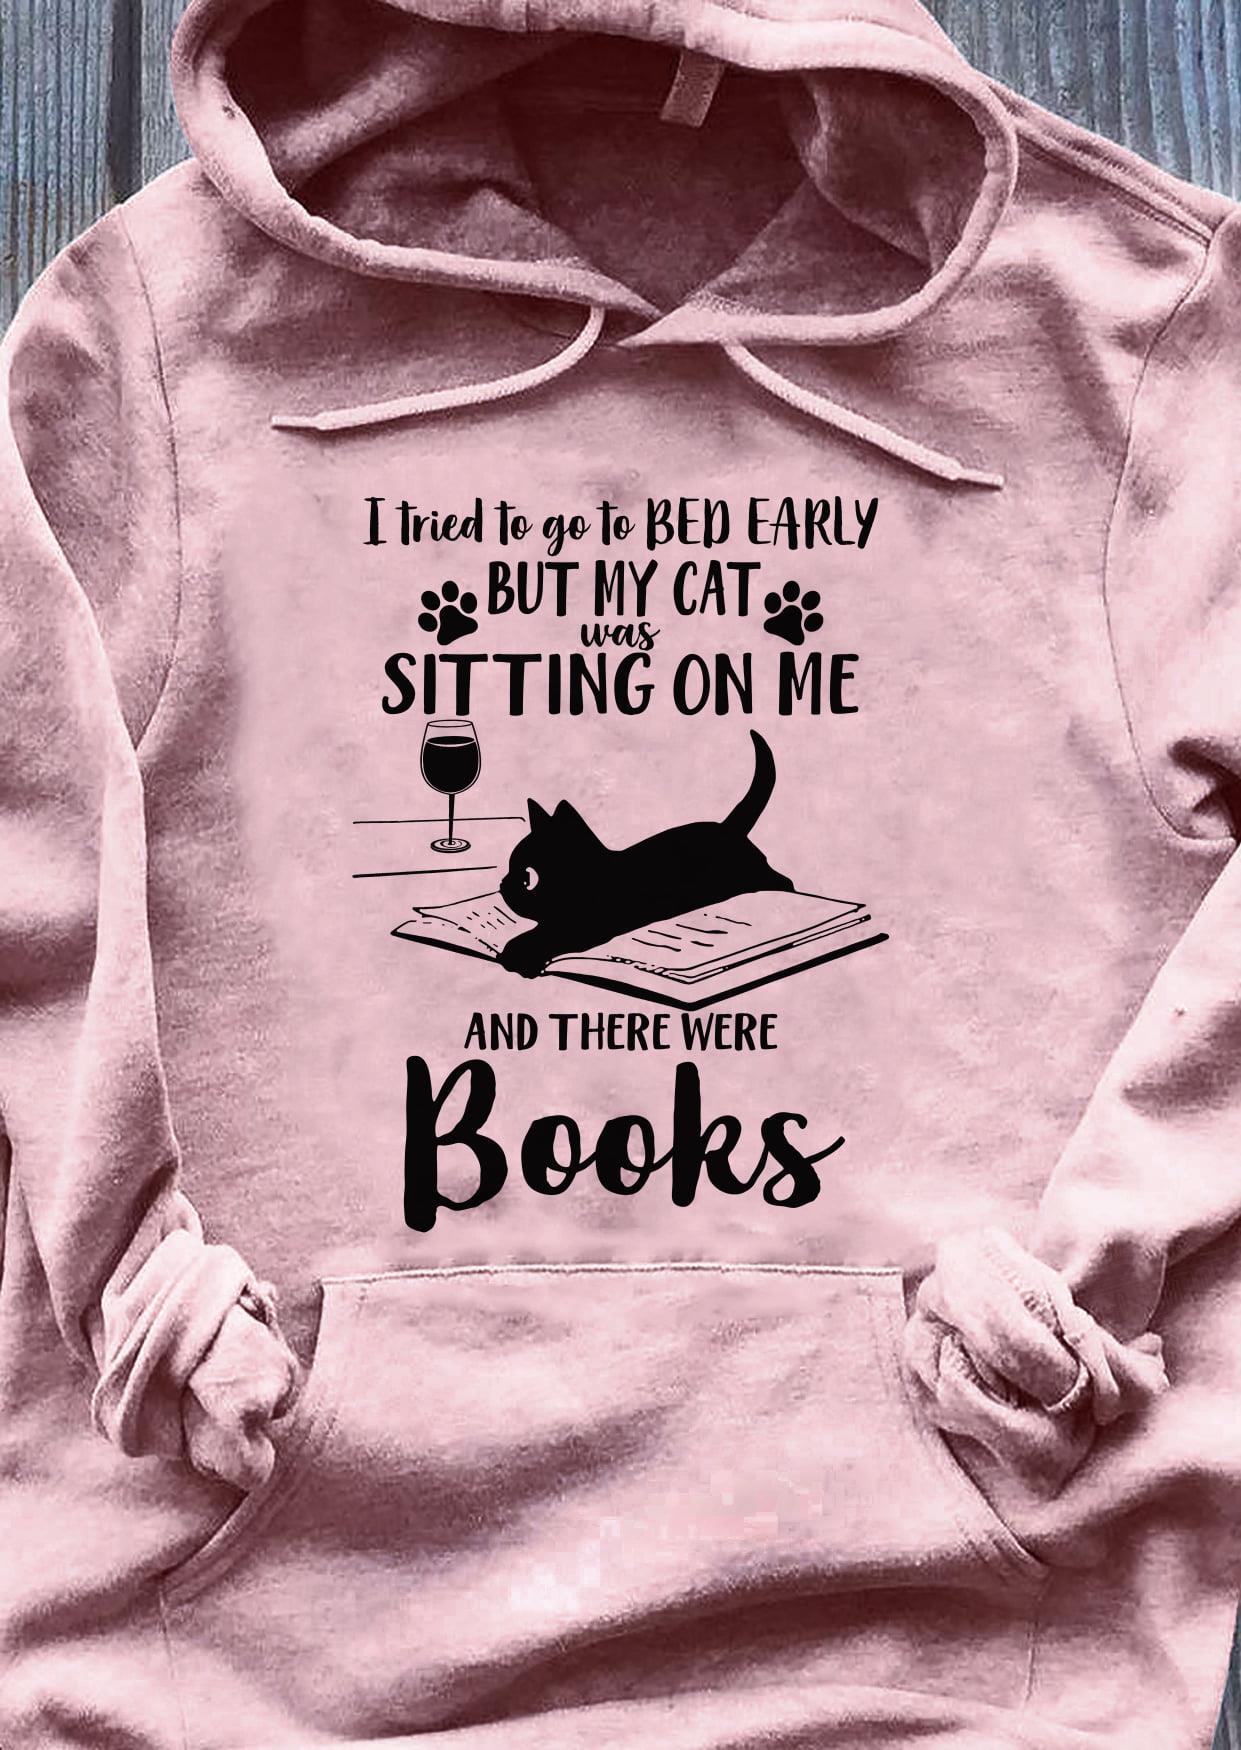 My Cat Was Sitting On Me And There Were Books Shirt